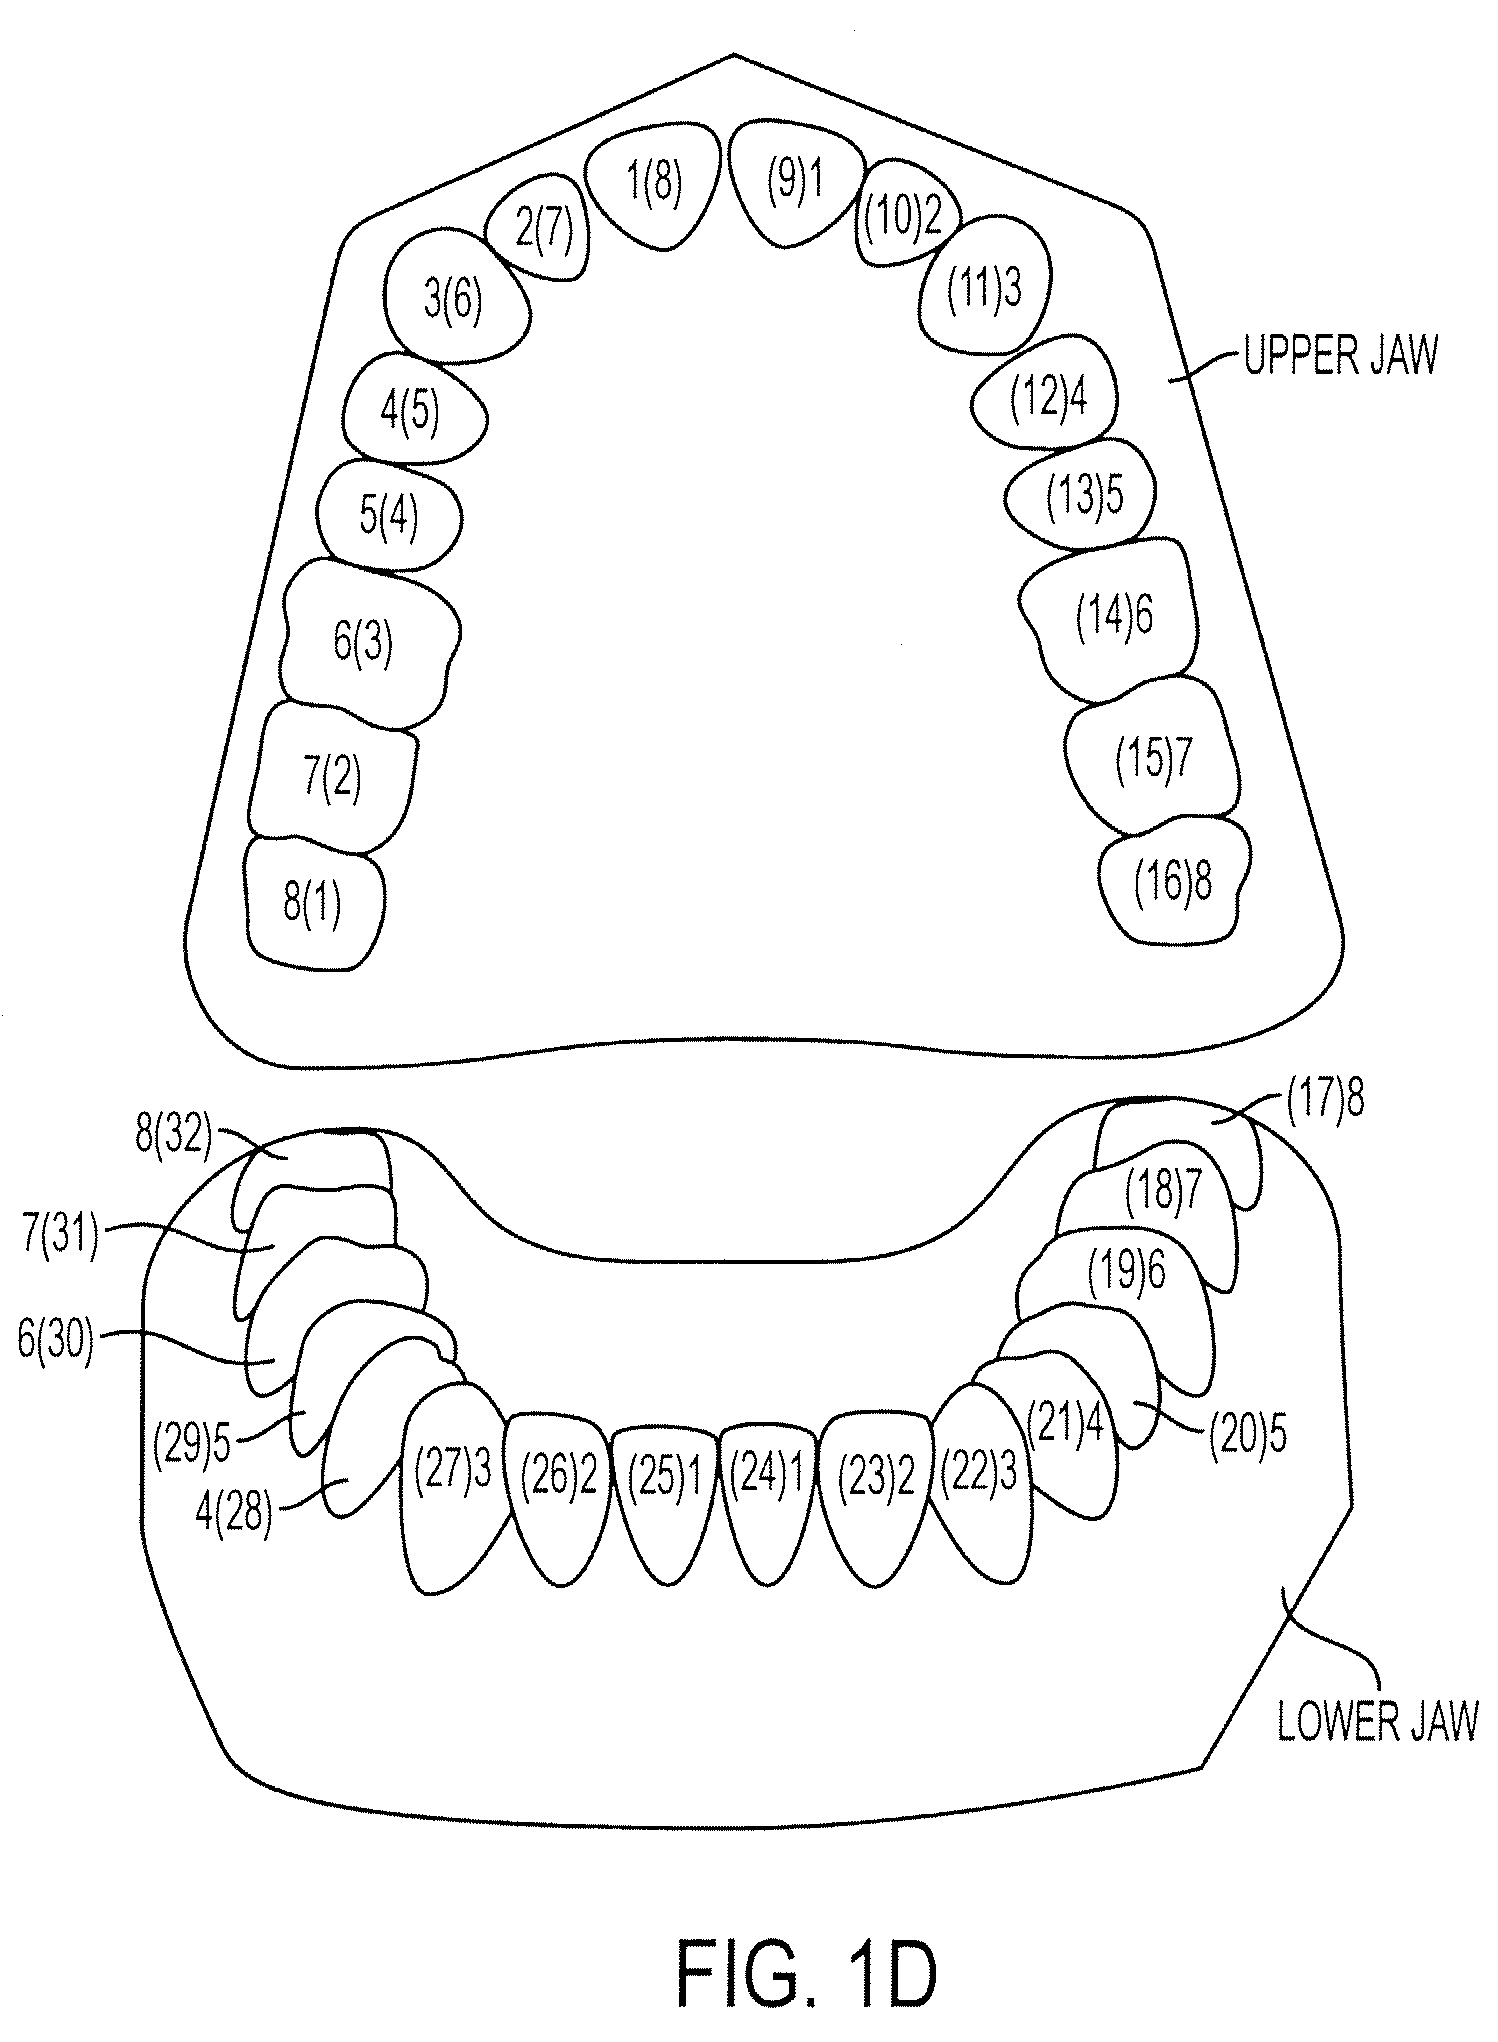 Automated treatment staging for teeth